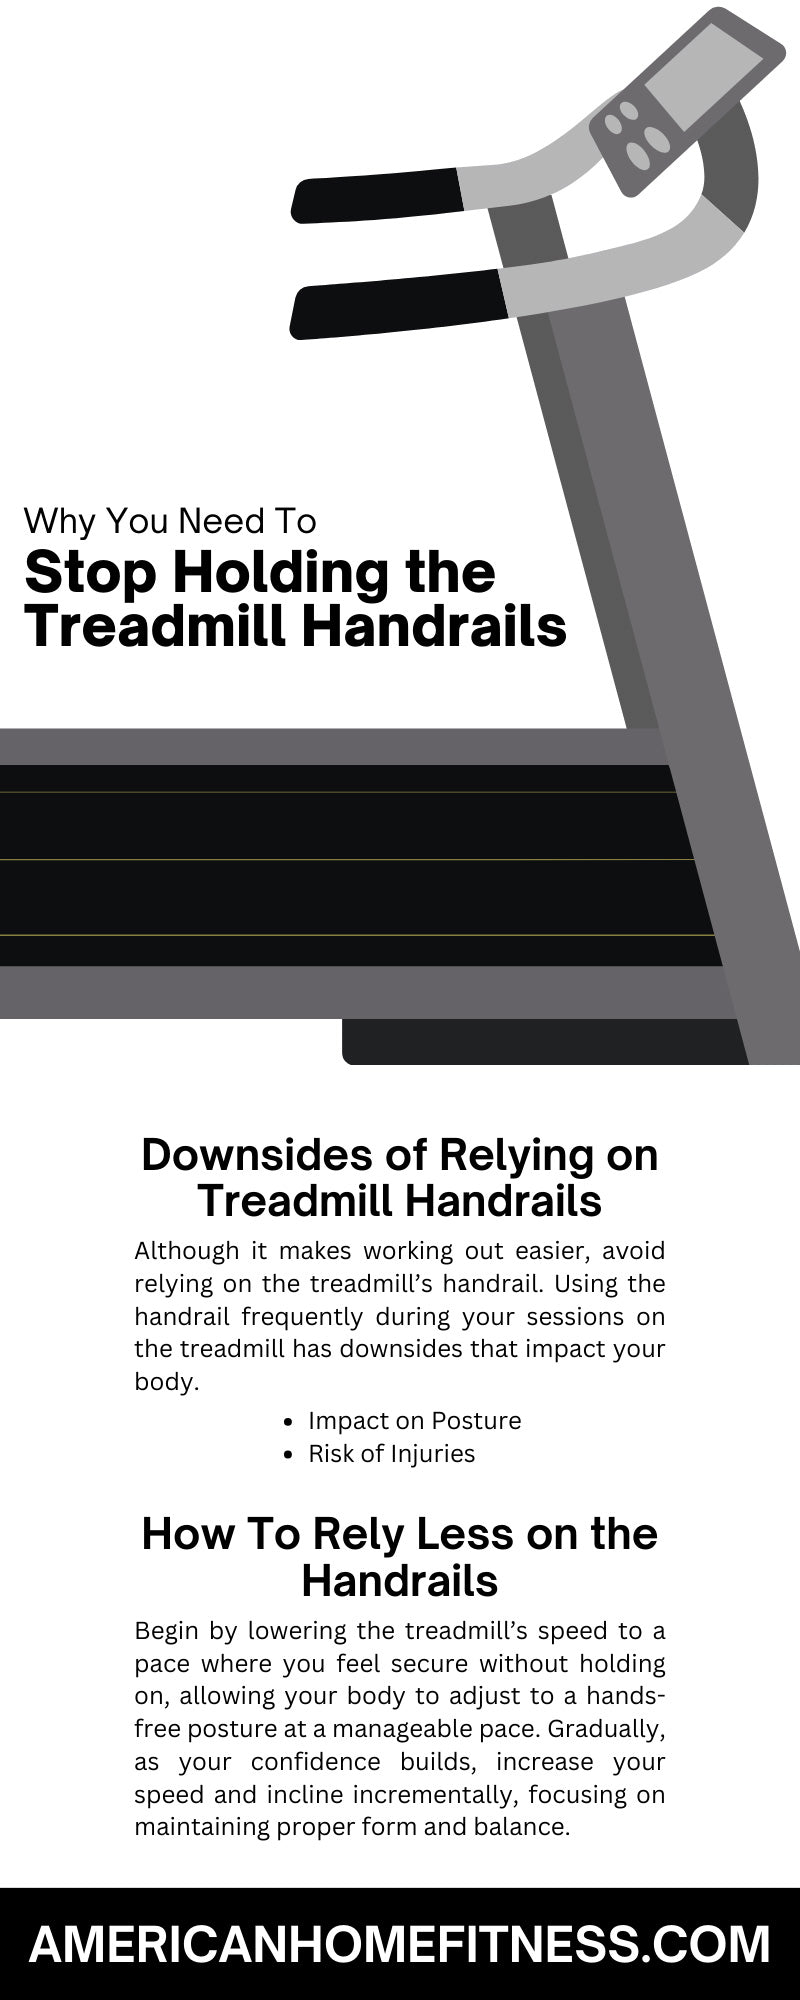 Why You Need To Stop Holding the Treadmill Handrails